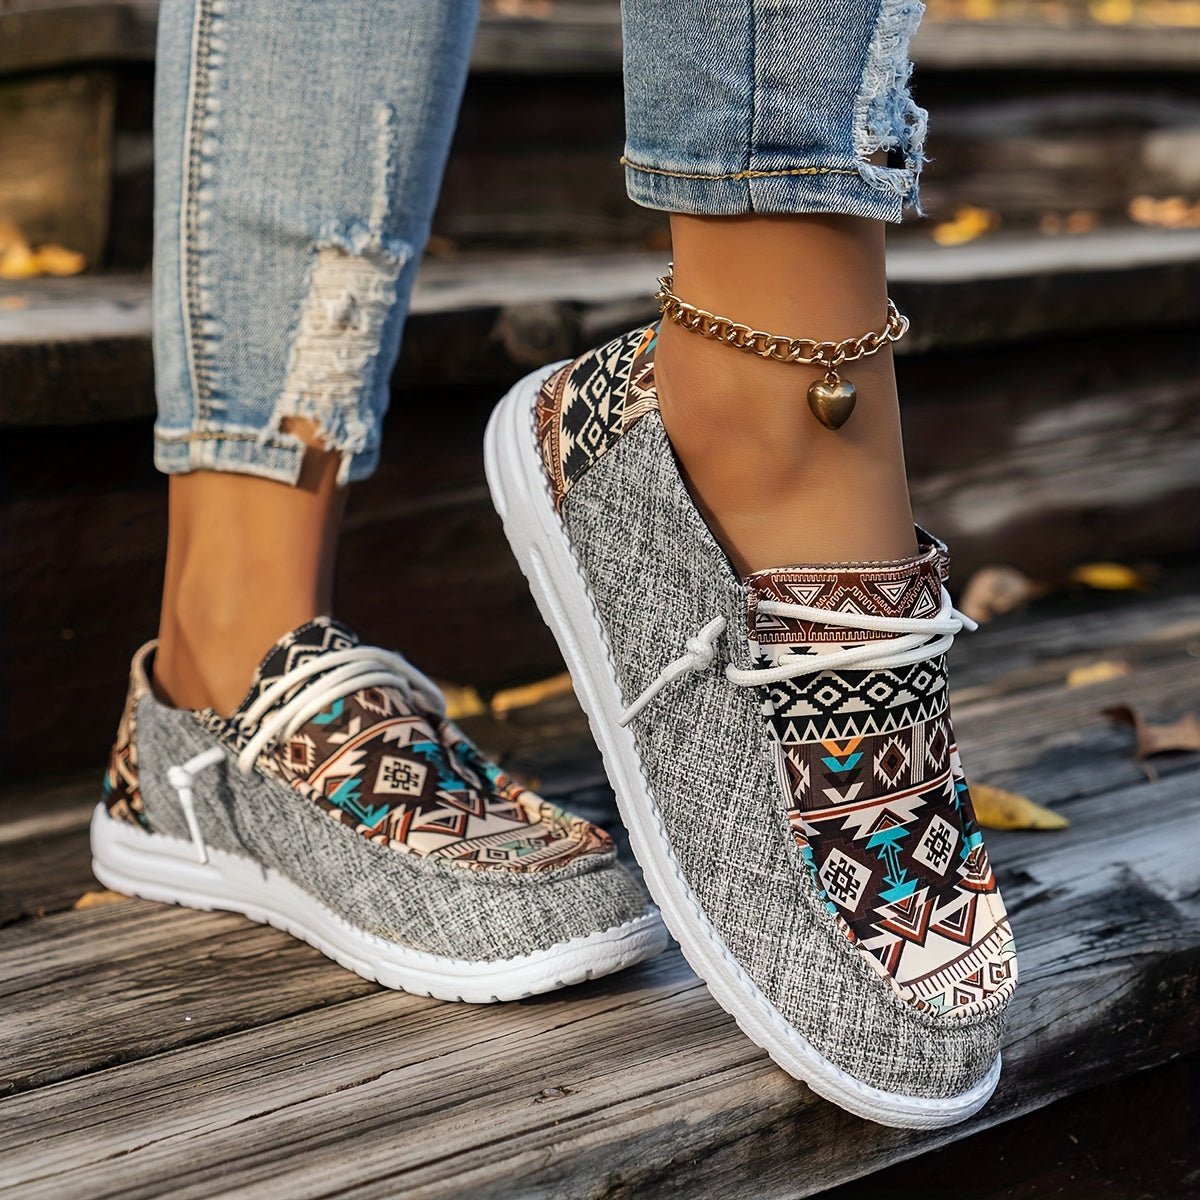 Women's Geometric Print Loafers, Soft Sole Lightweight Flat Slip On Shoes, Low-top Versatile Canvas Shoes